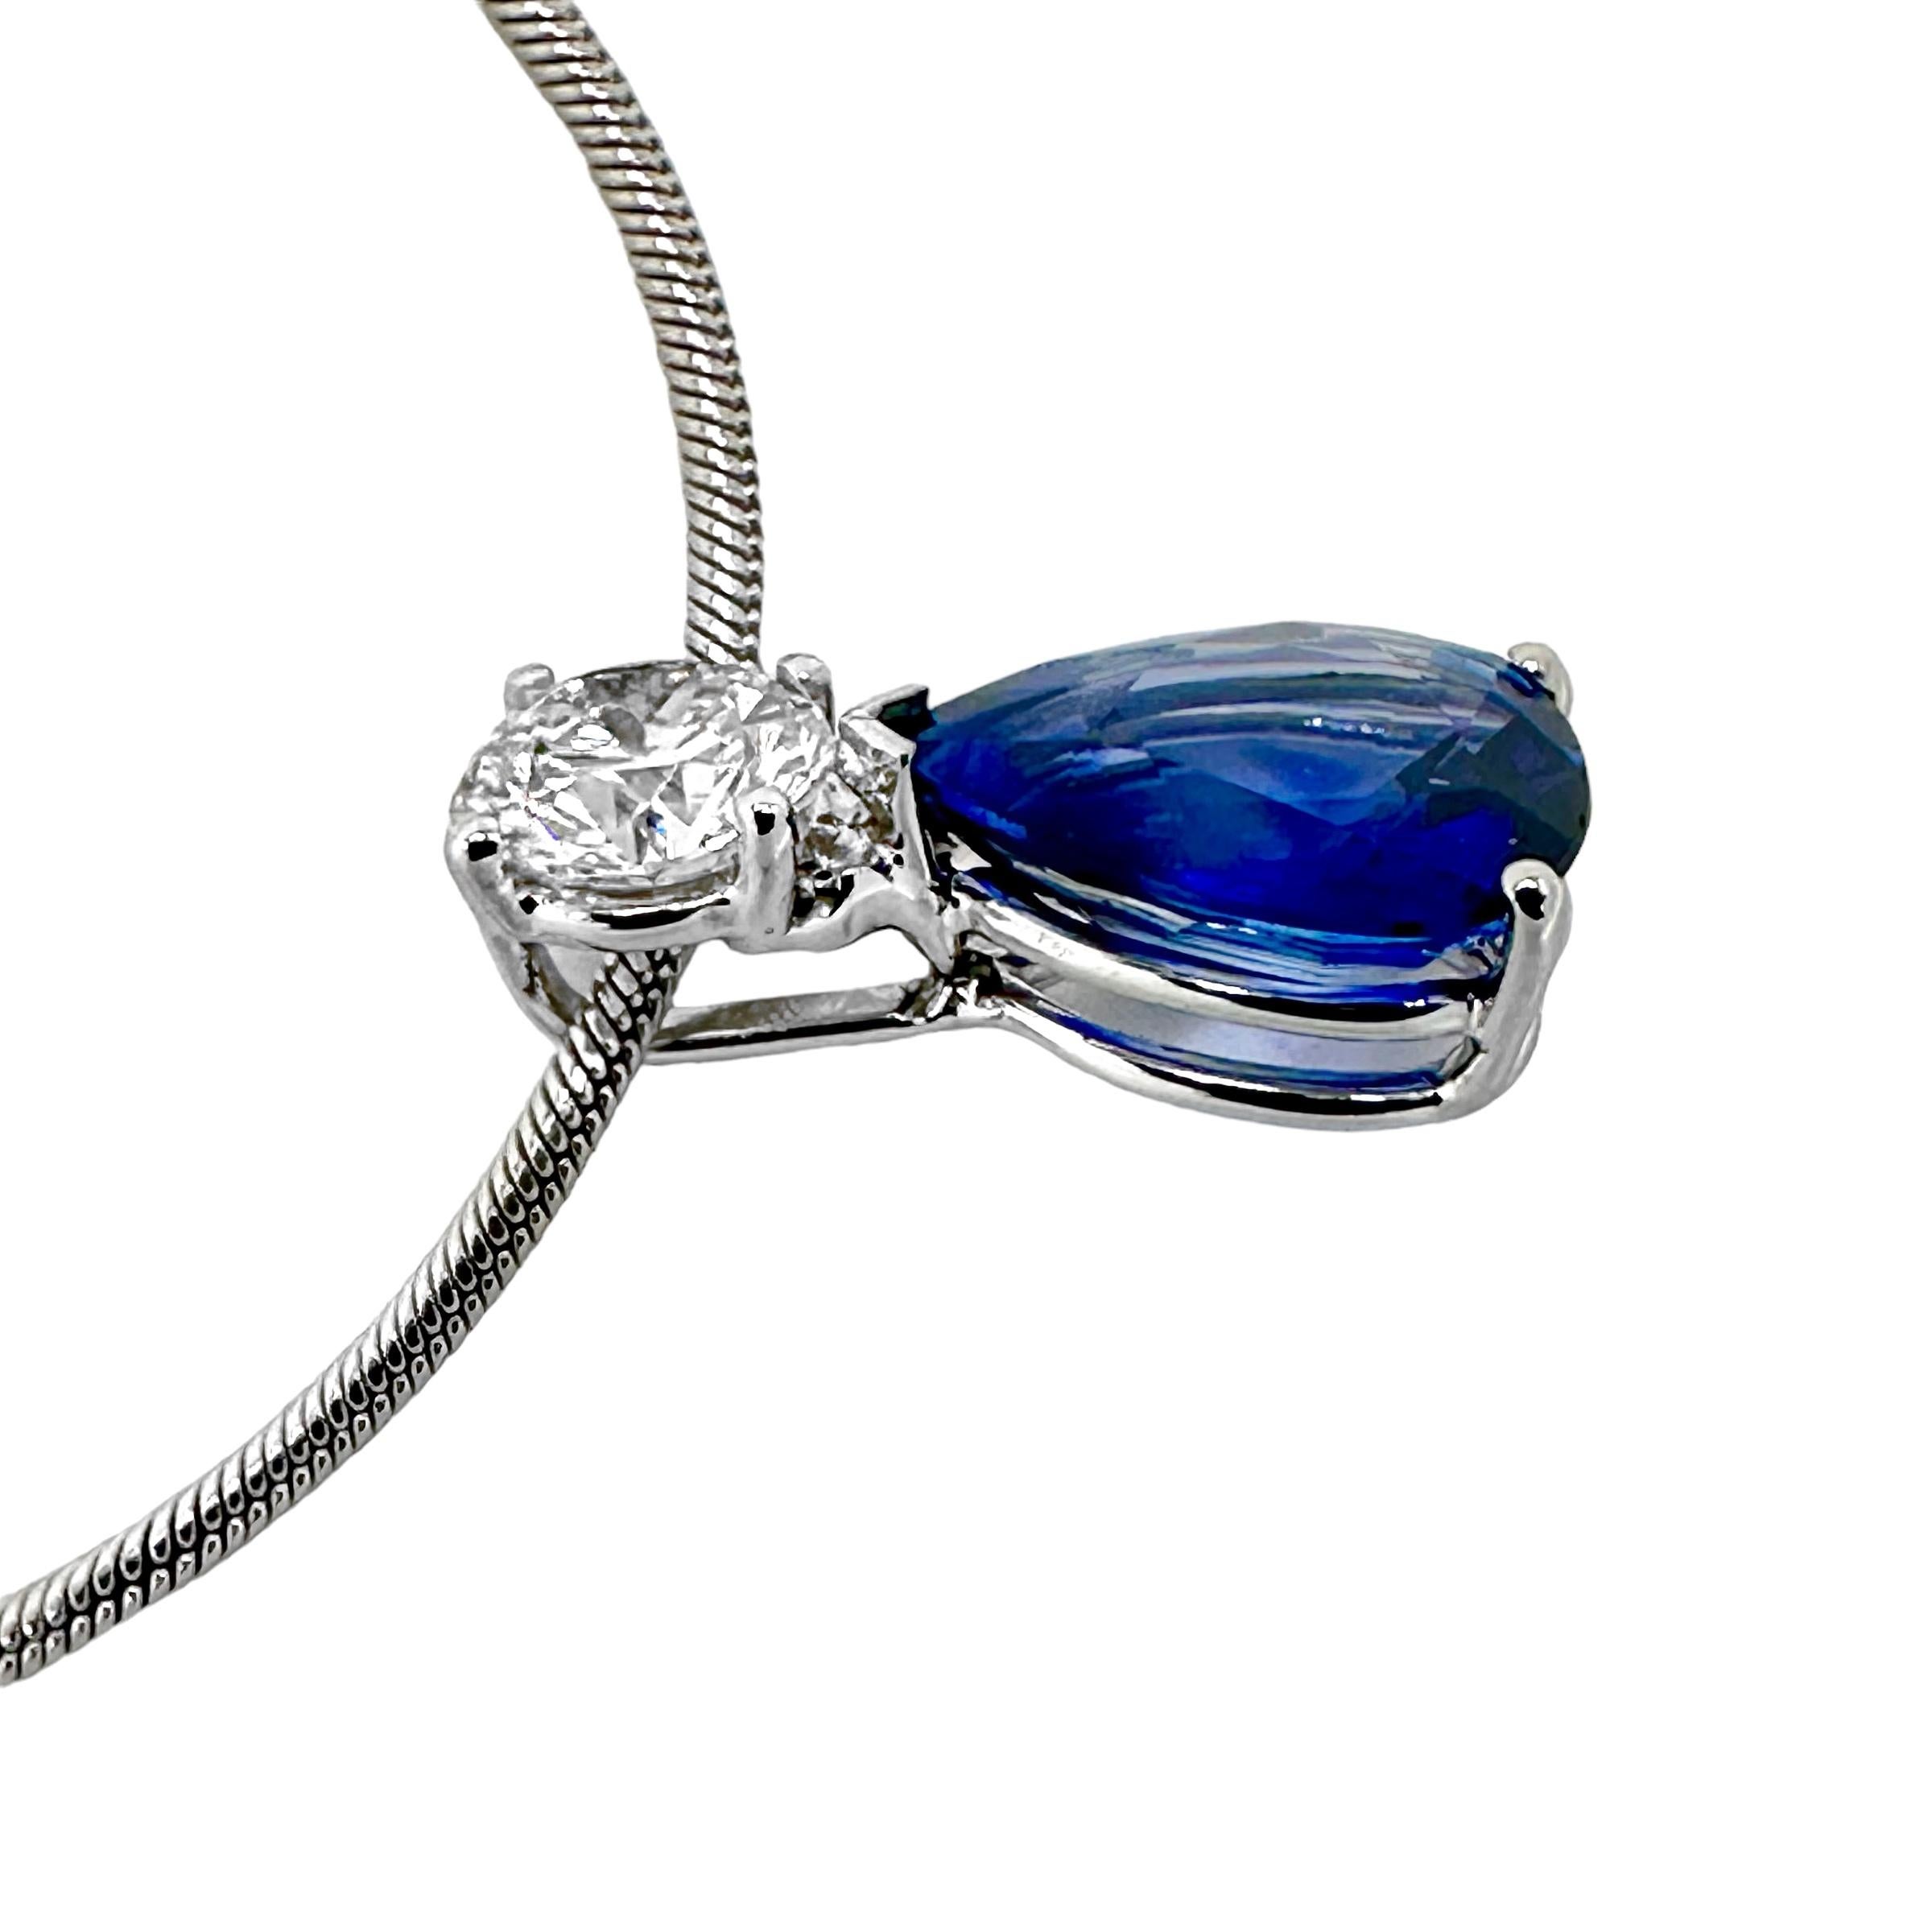 A traditional design with a modern update.
The .58ct round  brilliant cut diamond set in a 4 prong 14k white gold head, sits atop a vivid, marine blue 2.15ct pear shaped sapphire. The clean look is strong enough to stand alone, or ideal to stack